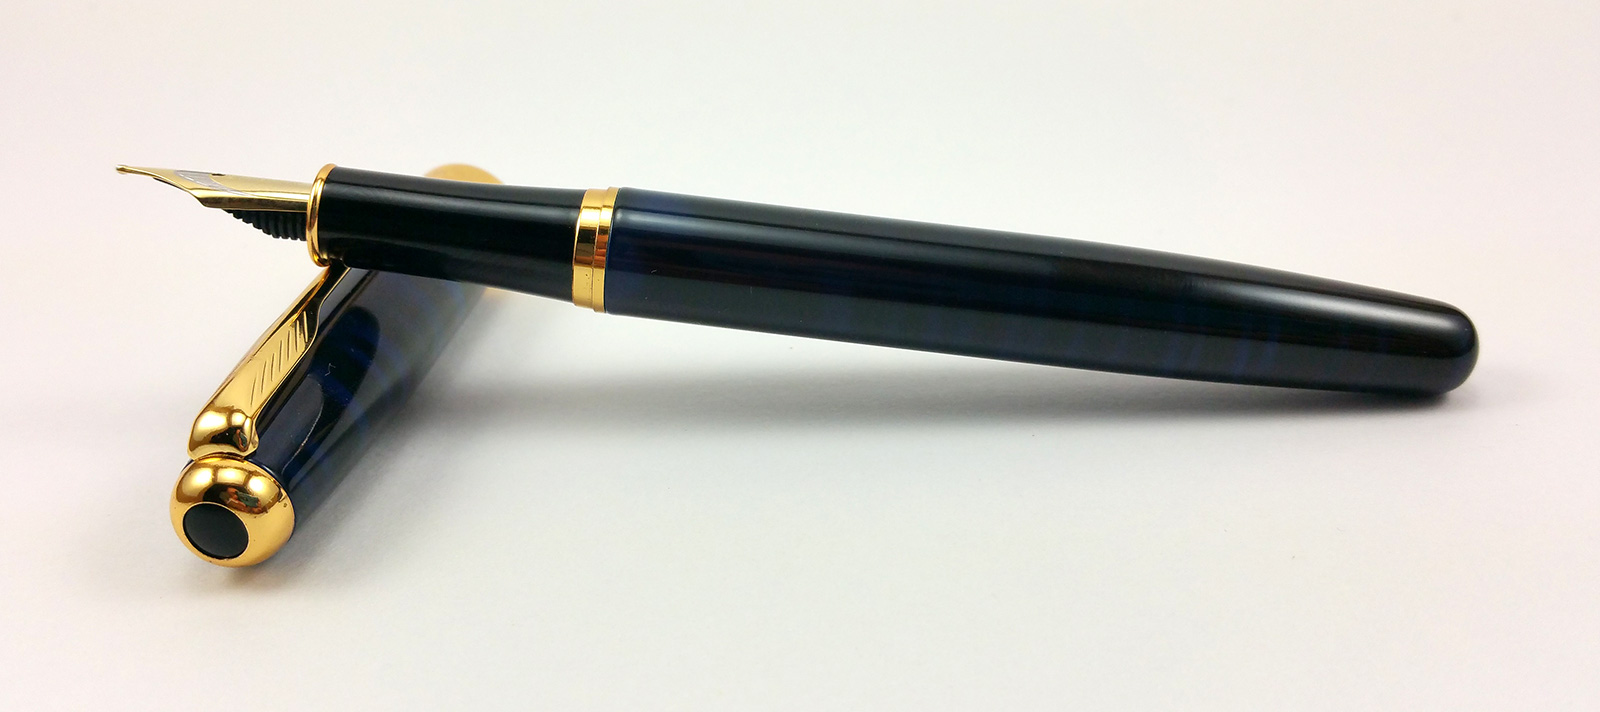 BAOER 388 Silver and Gold Fountain Pen with 5 ink cartridges Free Shipping! 